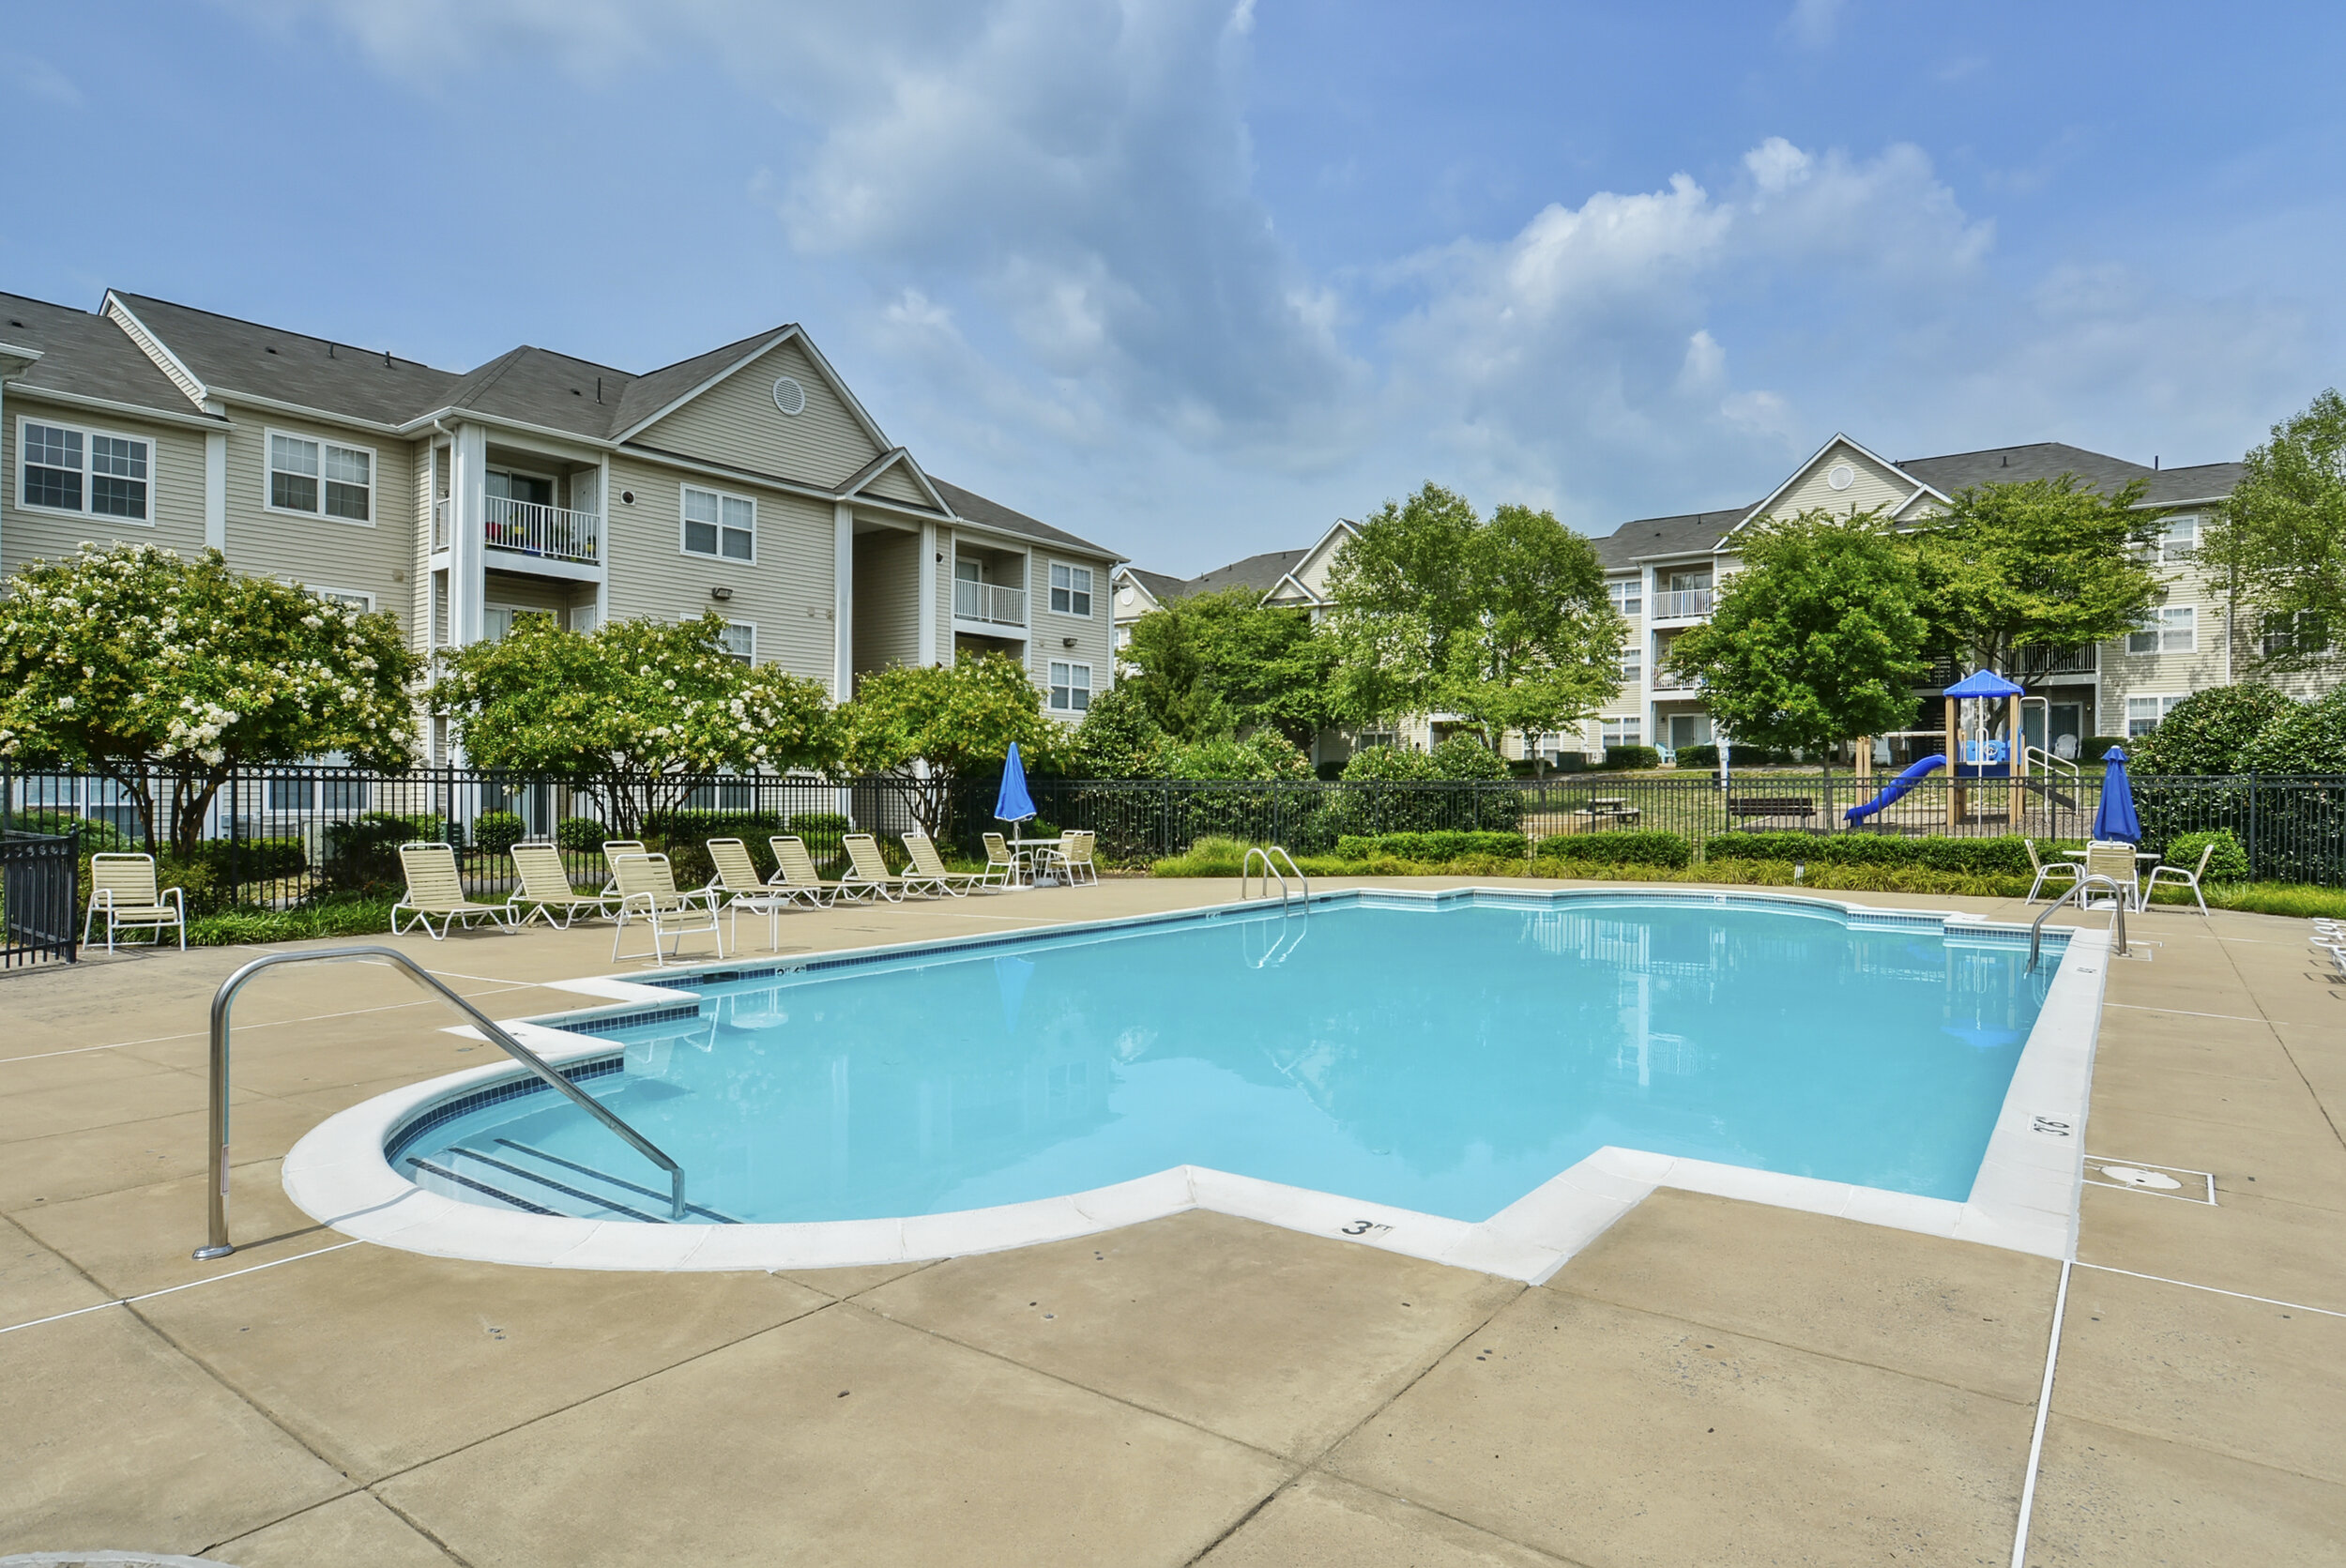  Relax at Potomac Station Apartments’ resort-style pool. 